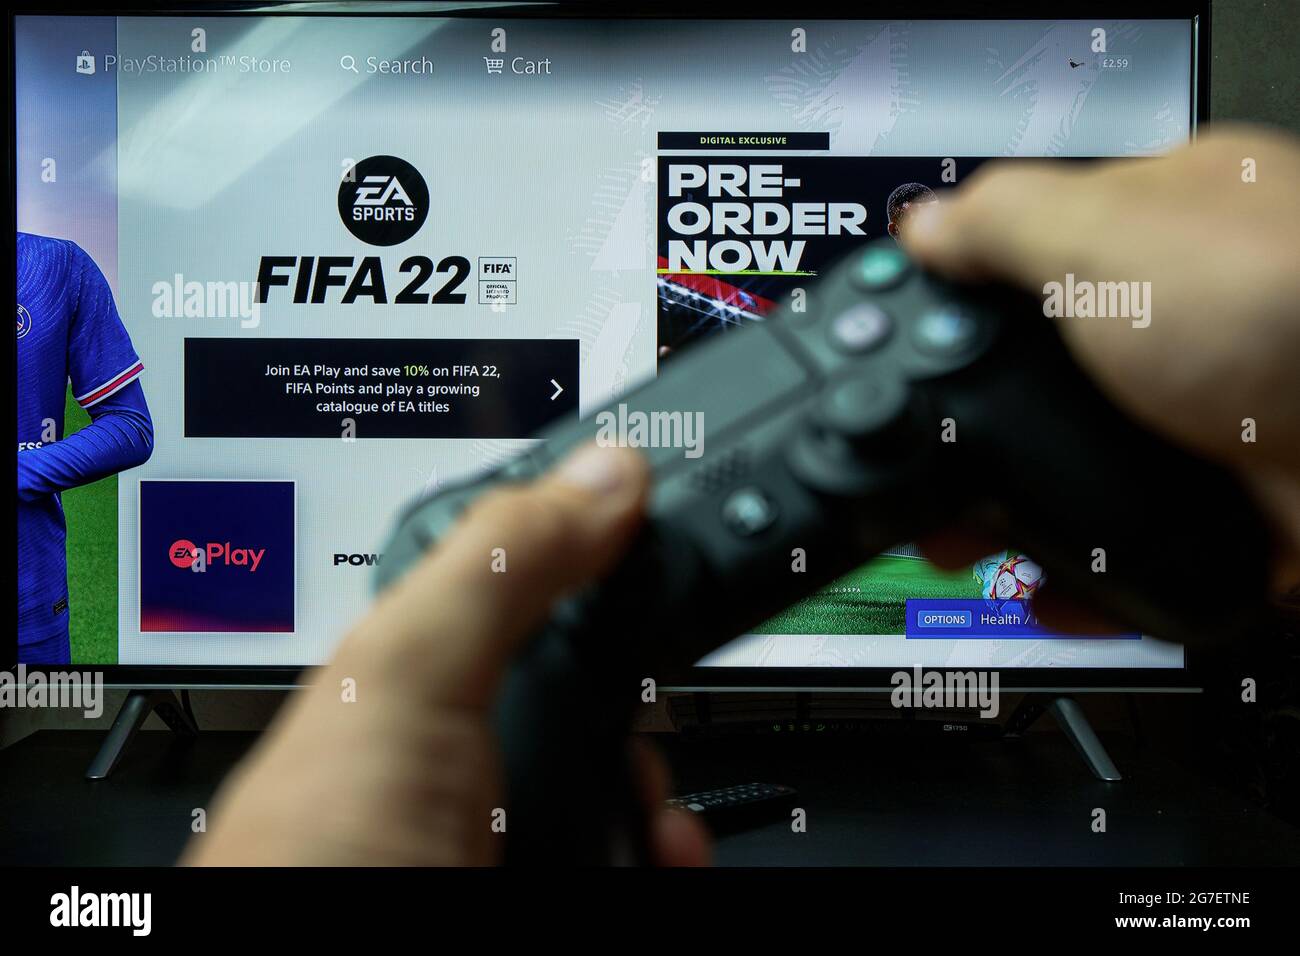 FIFA 2021 video football game on PS4 gaming console Stock Photo - Alamy